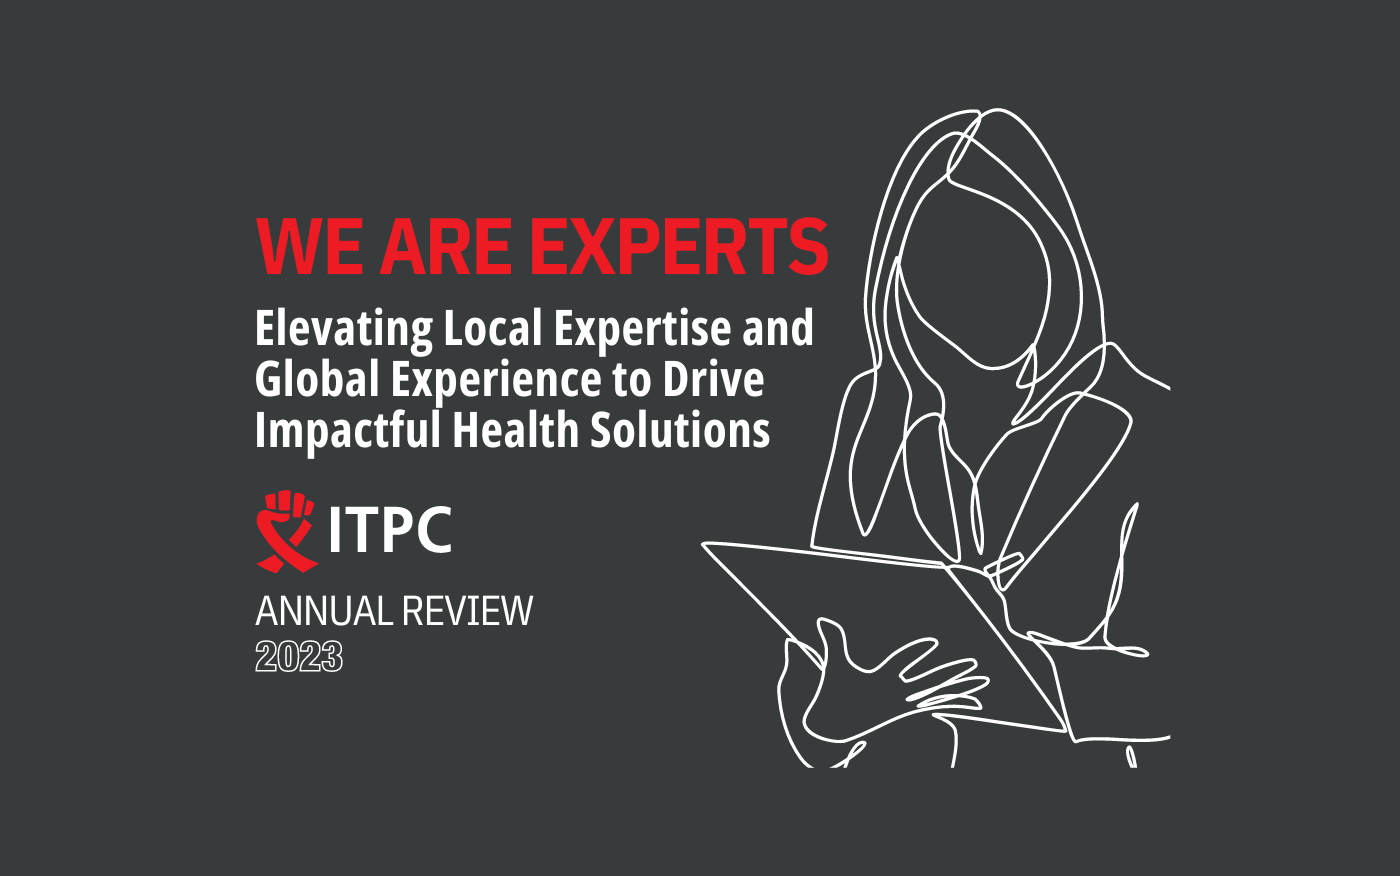 We are experts | ITPC Annual Review 2023